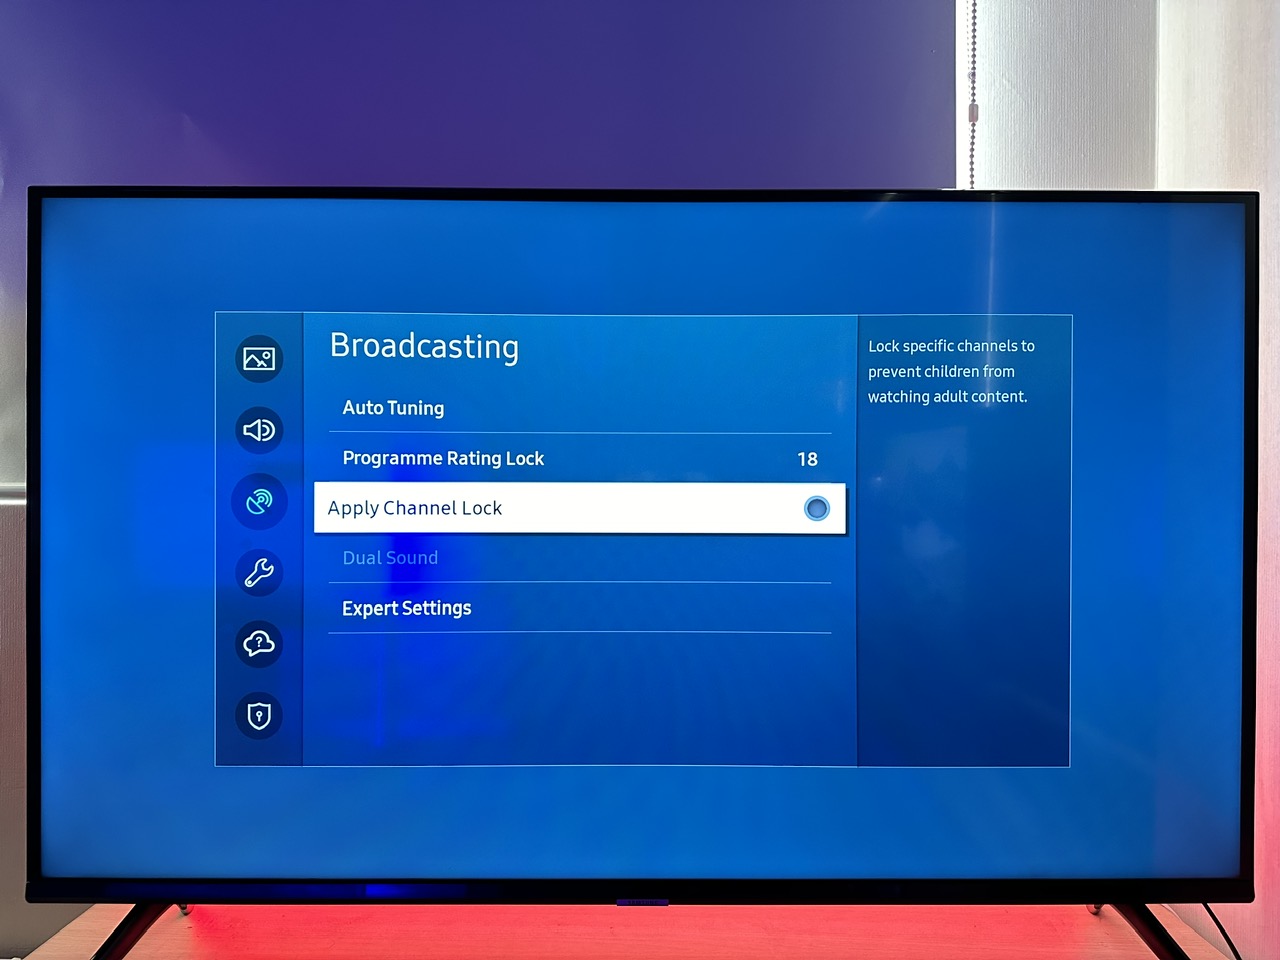 apply channel lock feature on a samsung tv is still disabled